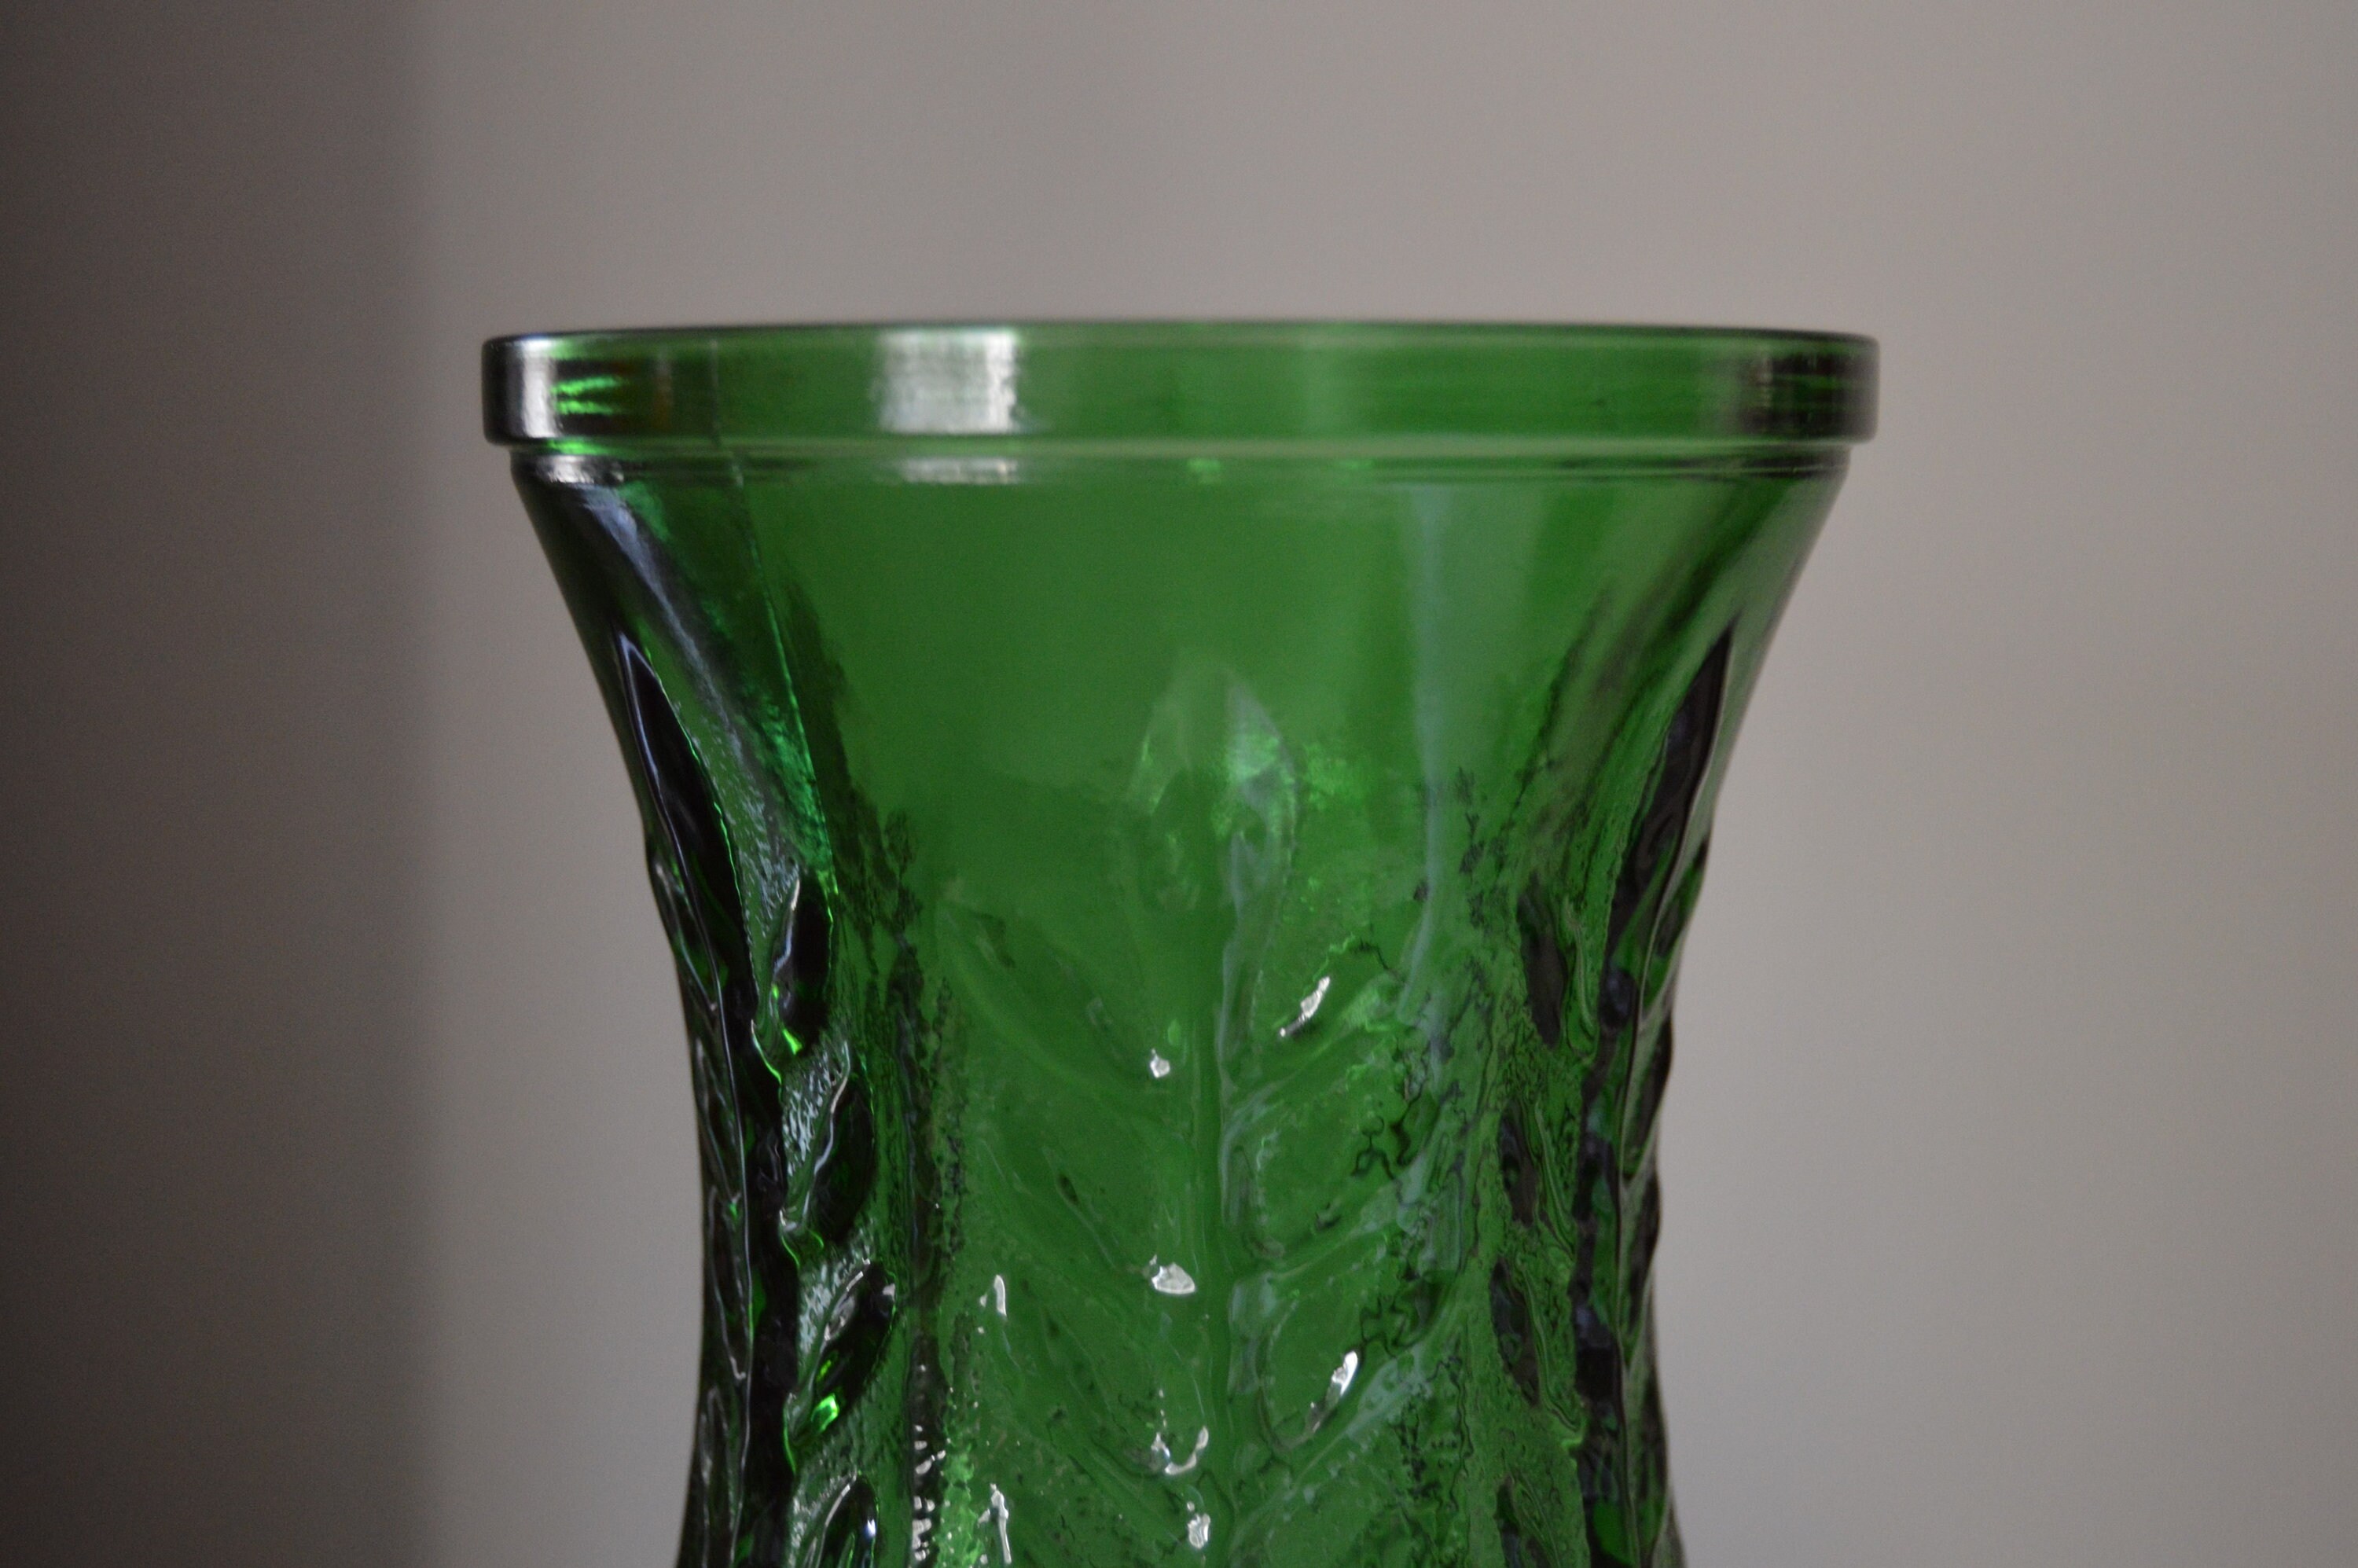 1977 Indiana Colony Glass FTD Emerald-Green Fern Rose 10 Flower Vase Manufactured for FTD by Indiana Glass Co Large Vase